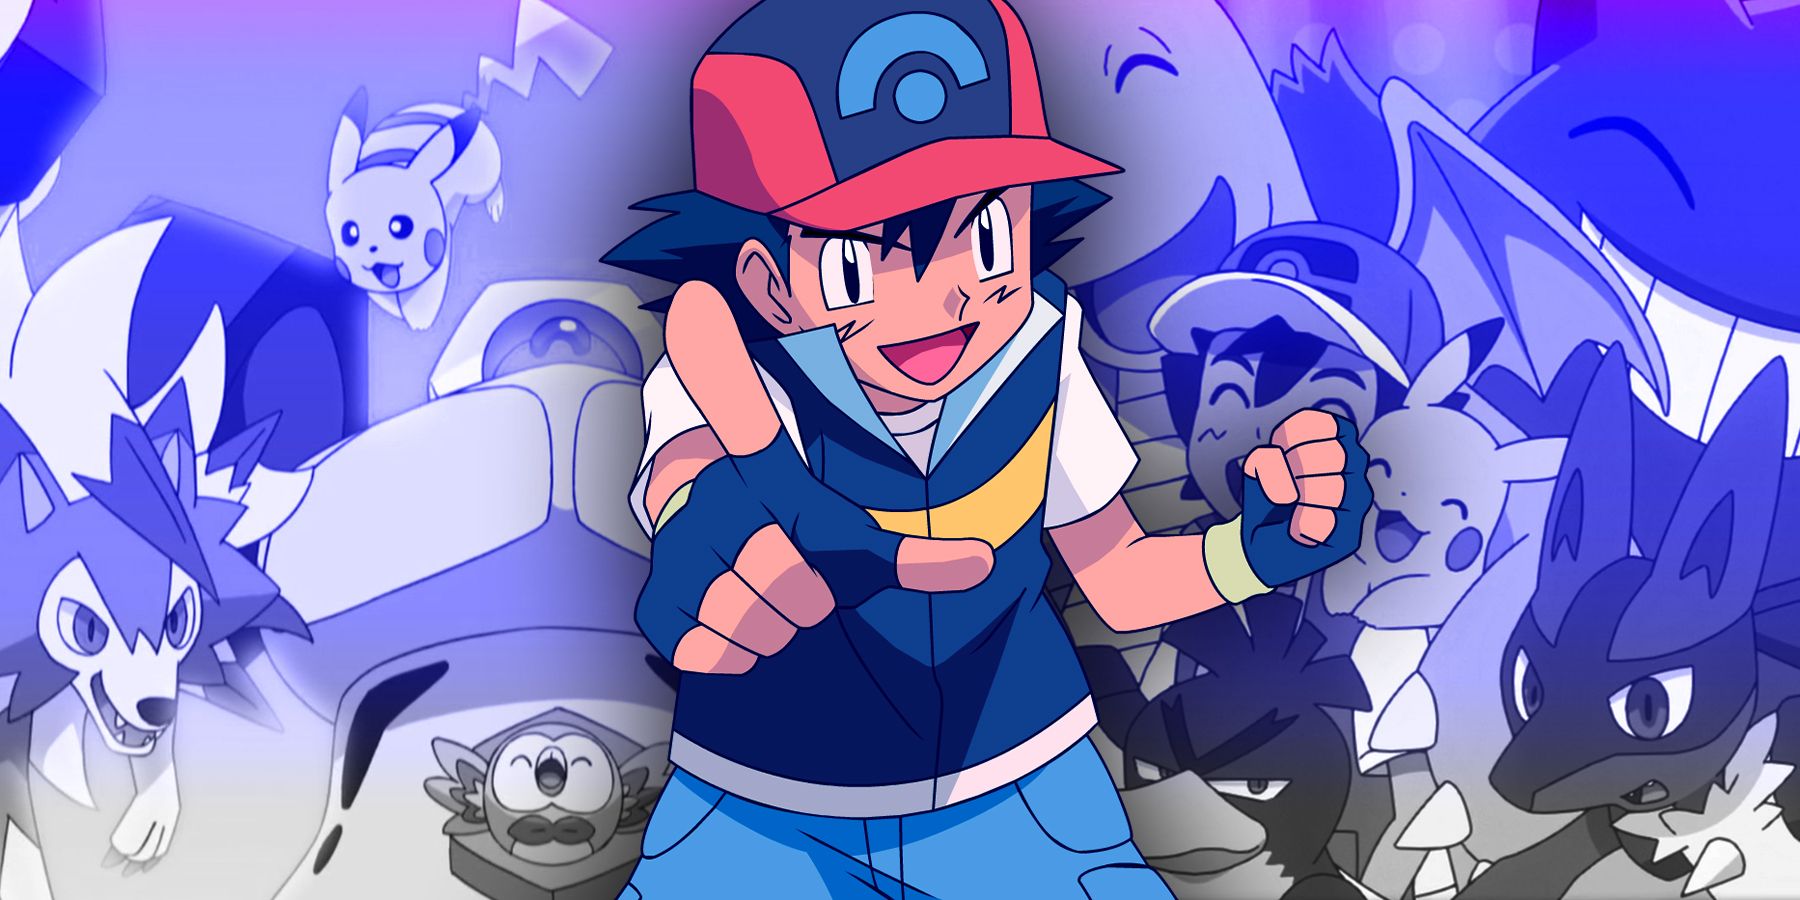 Ash's all-star lineup of old friends makes his final Pokemon anime arc  hit even harder